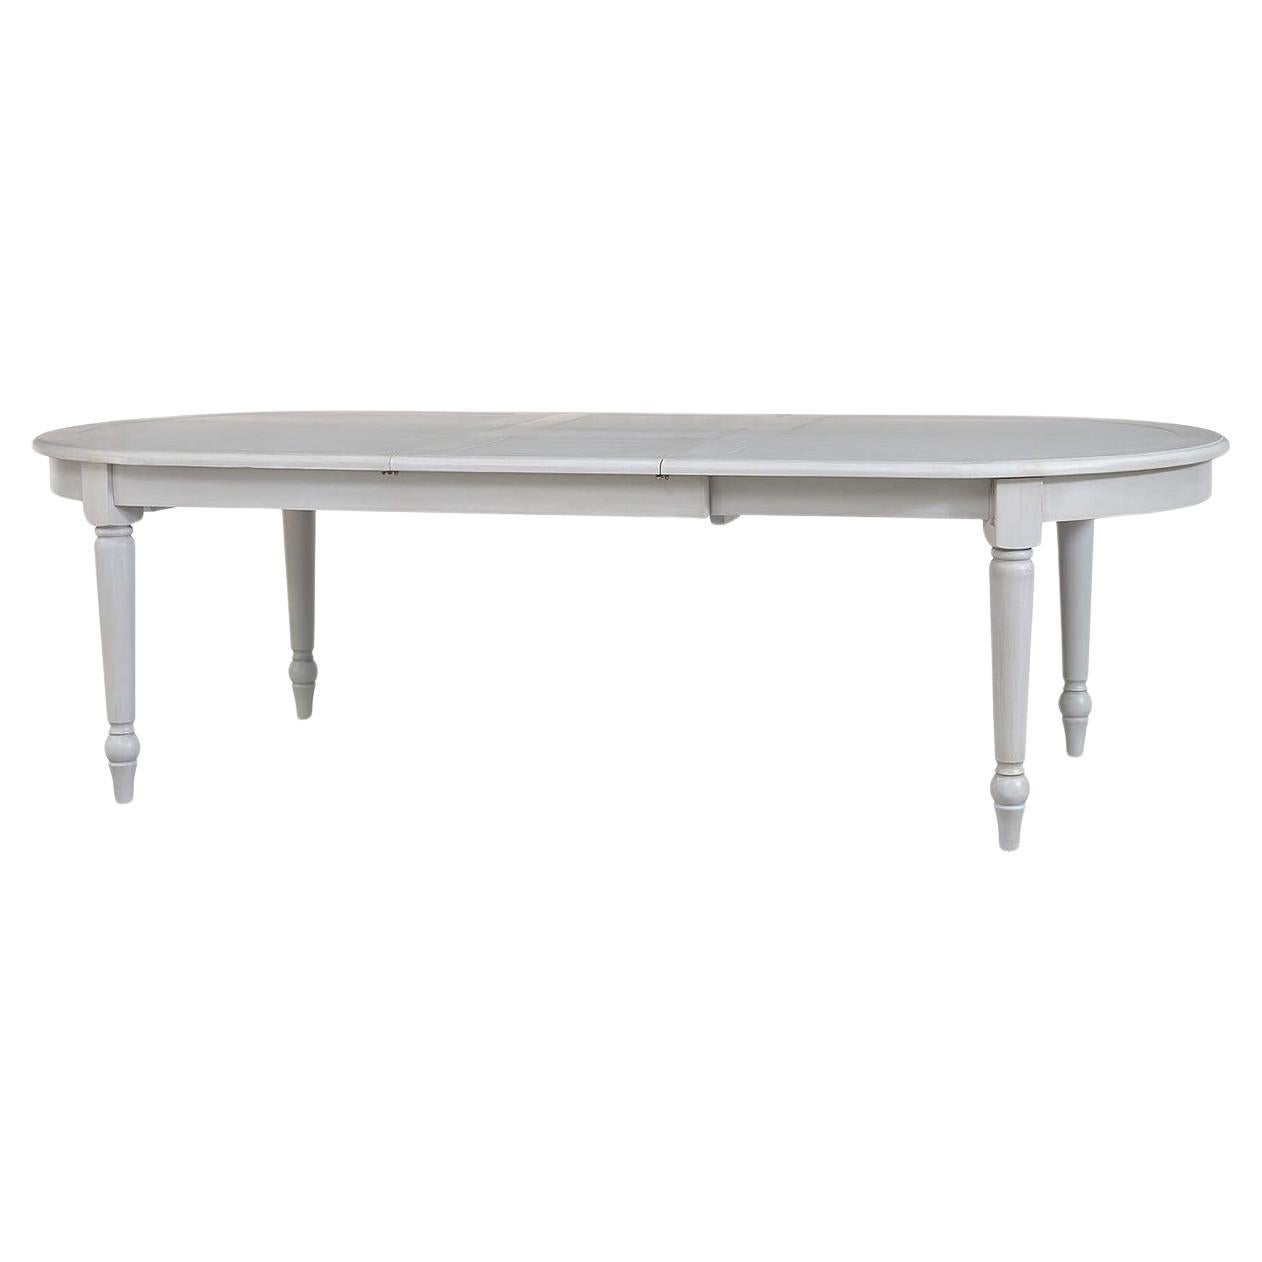 French Provincial Extendable Oval Dining Table - Charleston Grey